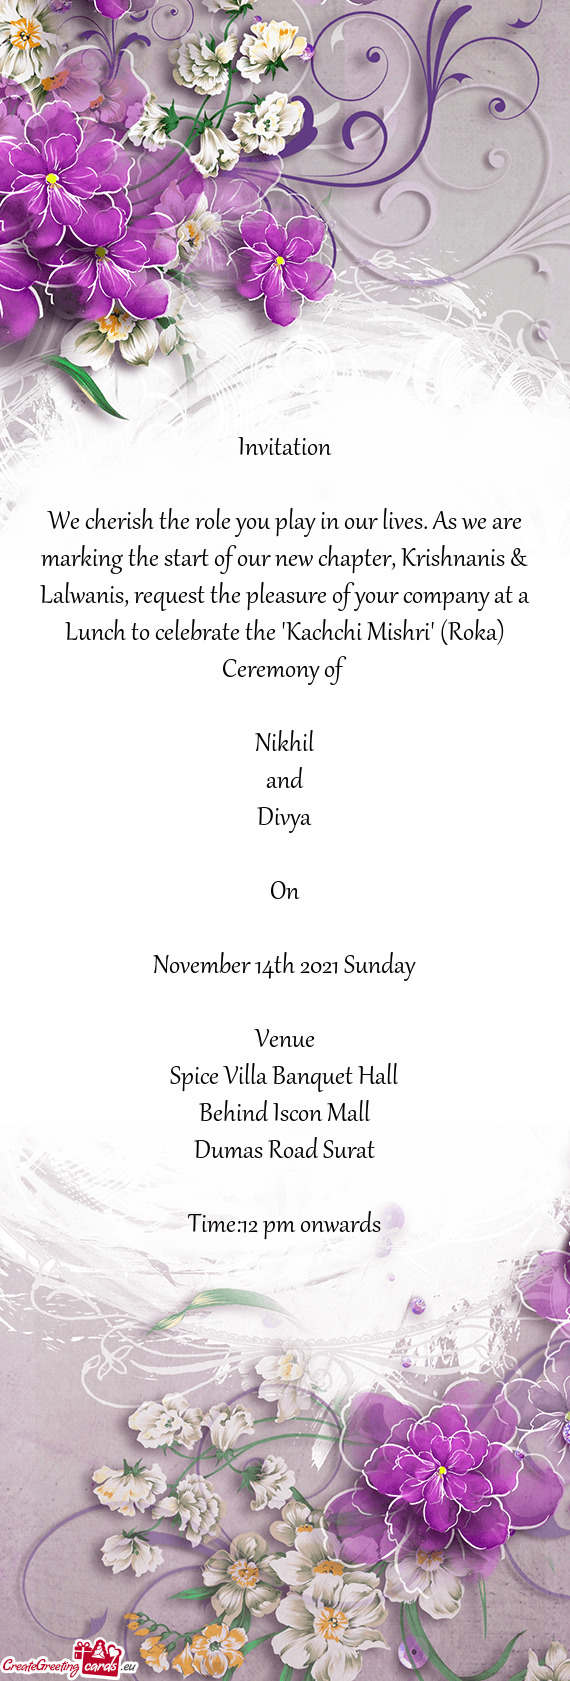 S & Lalwanis, request the pleasure of your company at a Lunch to celebrate the "Kachchi Mishri" (Rok